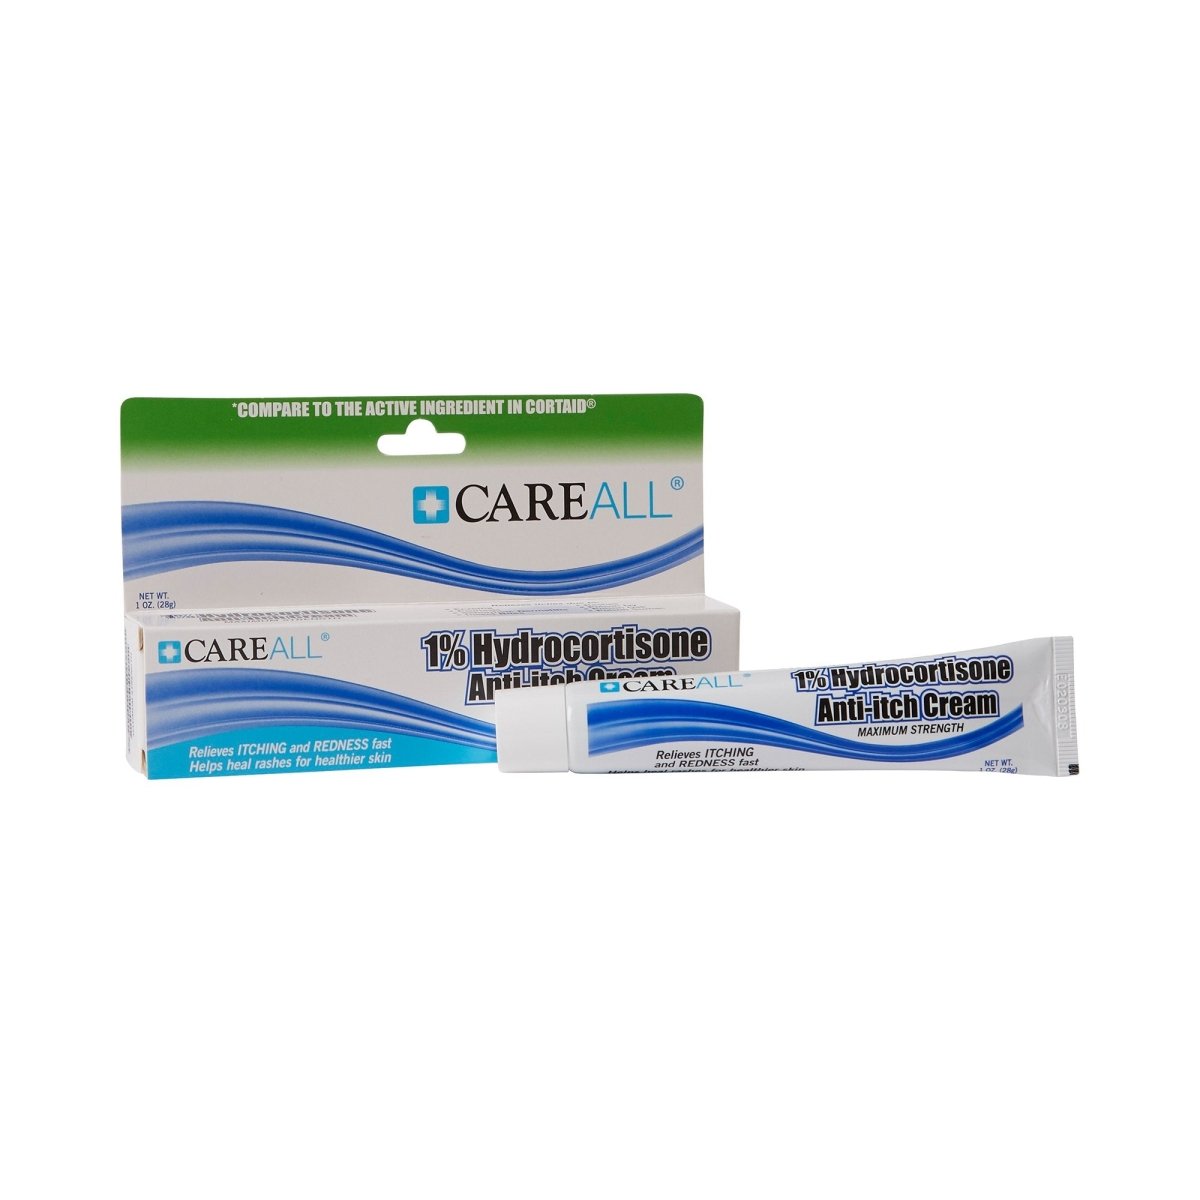 Careall Hydrocortisone Itch Relief - 838876_CS - 1